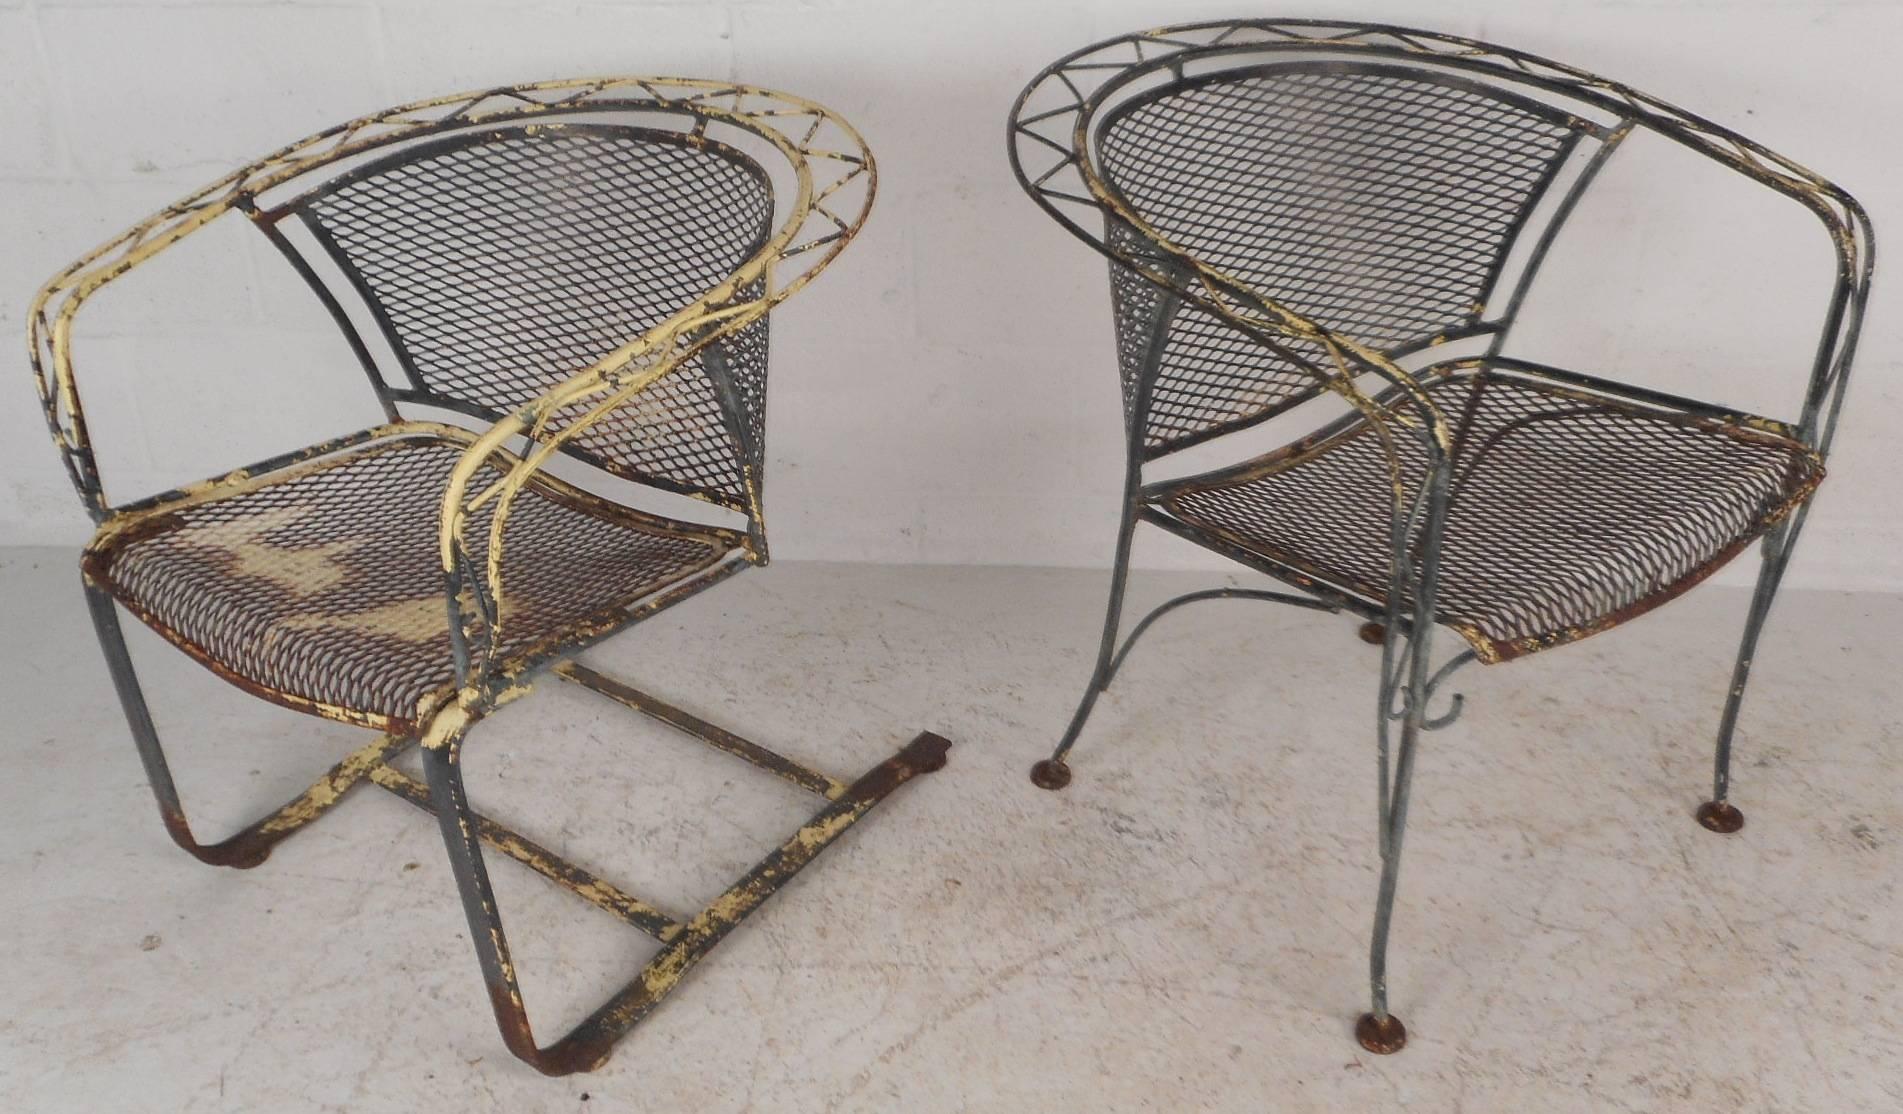 This gorgeous Mid-Century Modern patio set is made entirely of wrought iron and features a sculpted frame. Unique design with scroll detail, barrel back rests, and angled legs. One chair has sled base while the other sits on four sturdy legs.